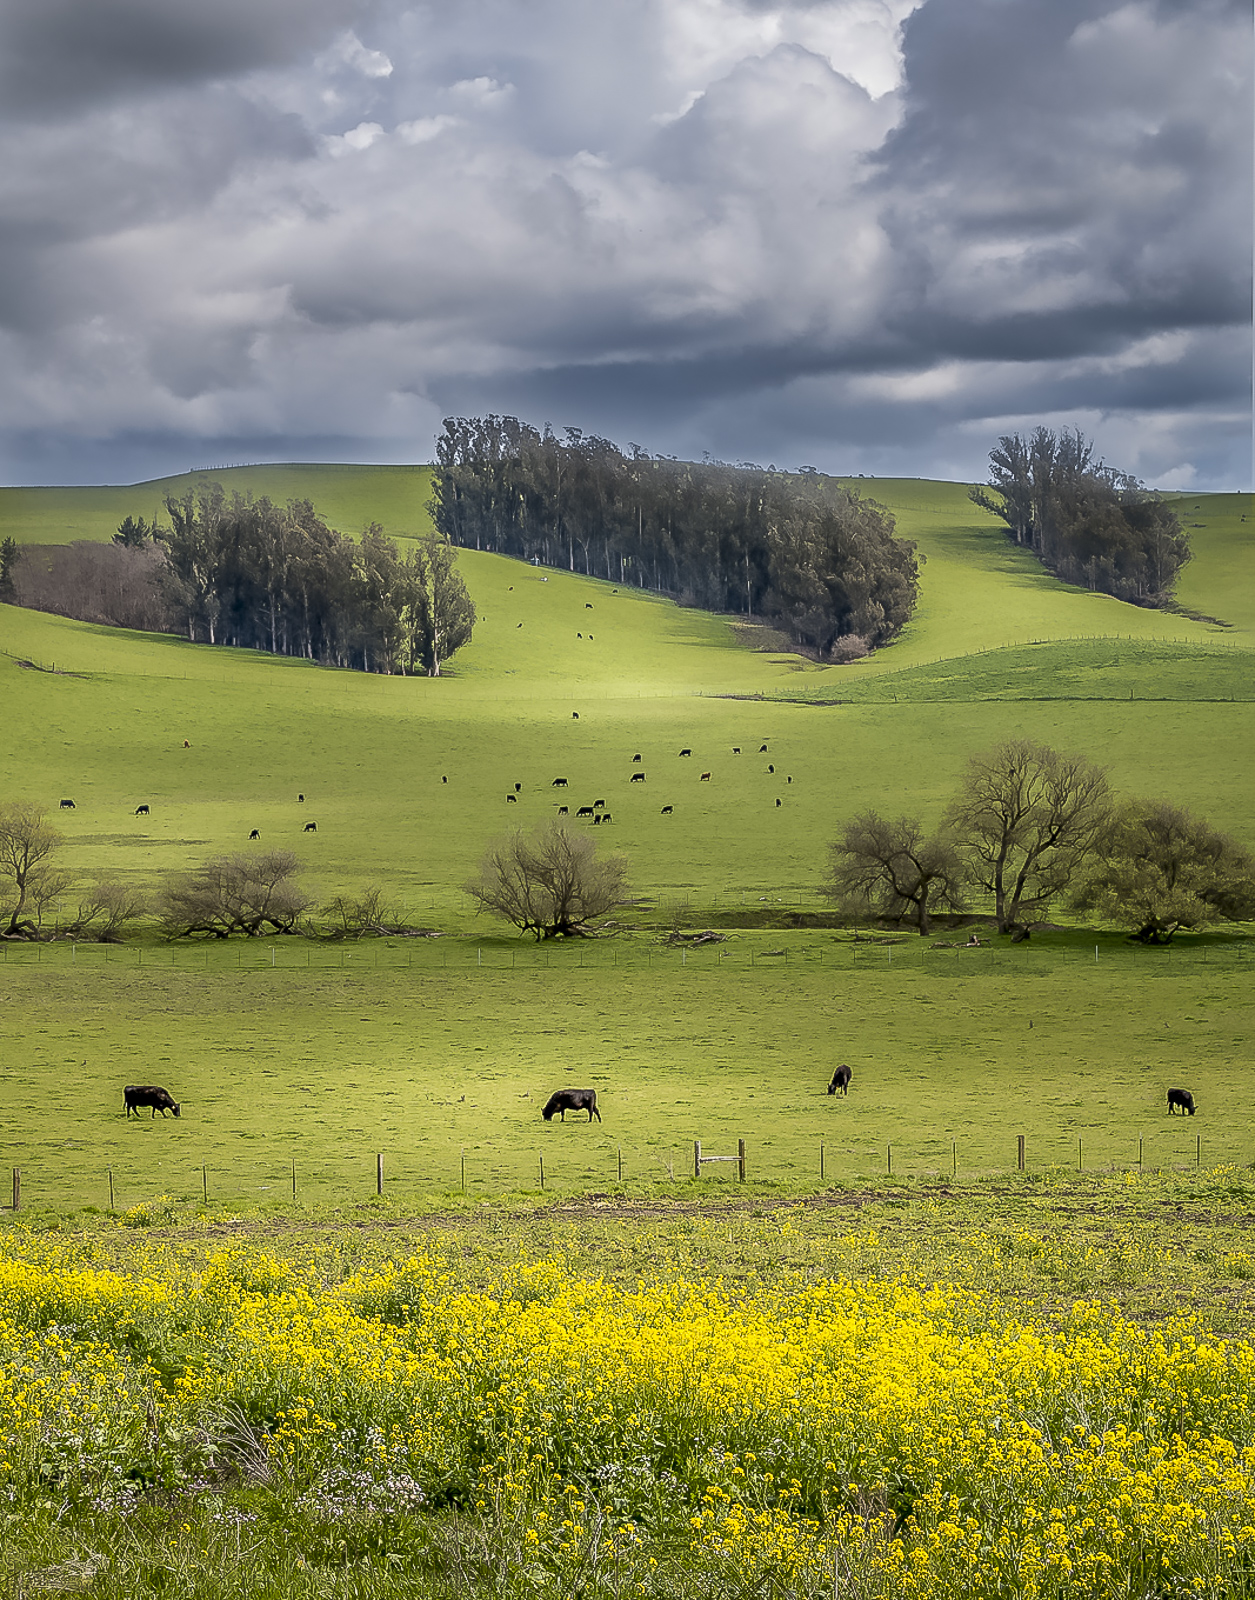 Pasture off of Bloomfield Road in Bloomfield, Sonoma County, California March 17, 2018